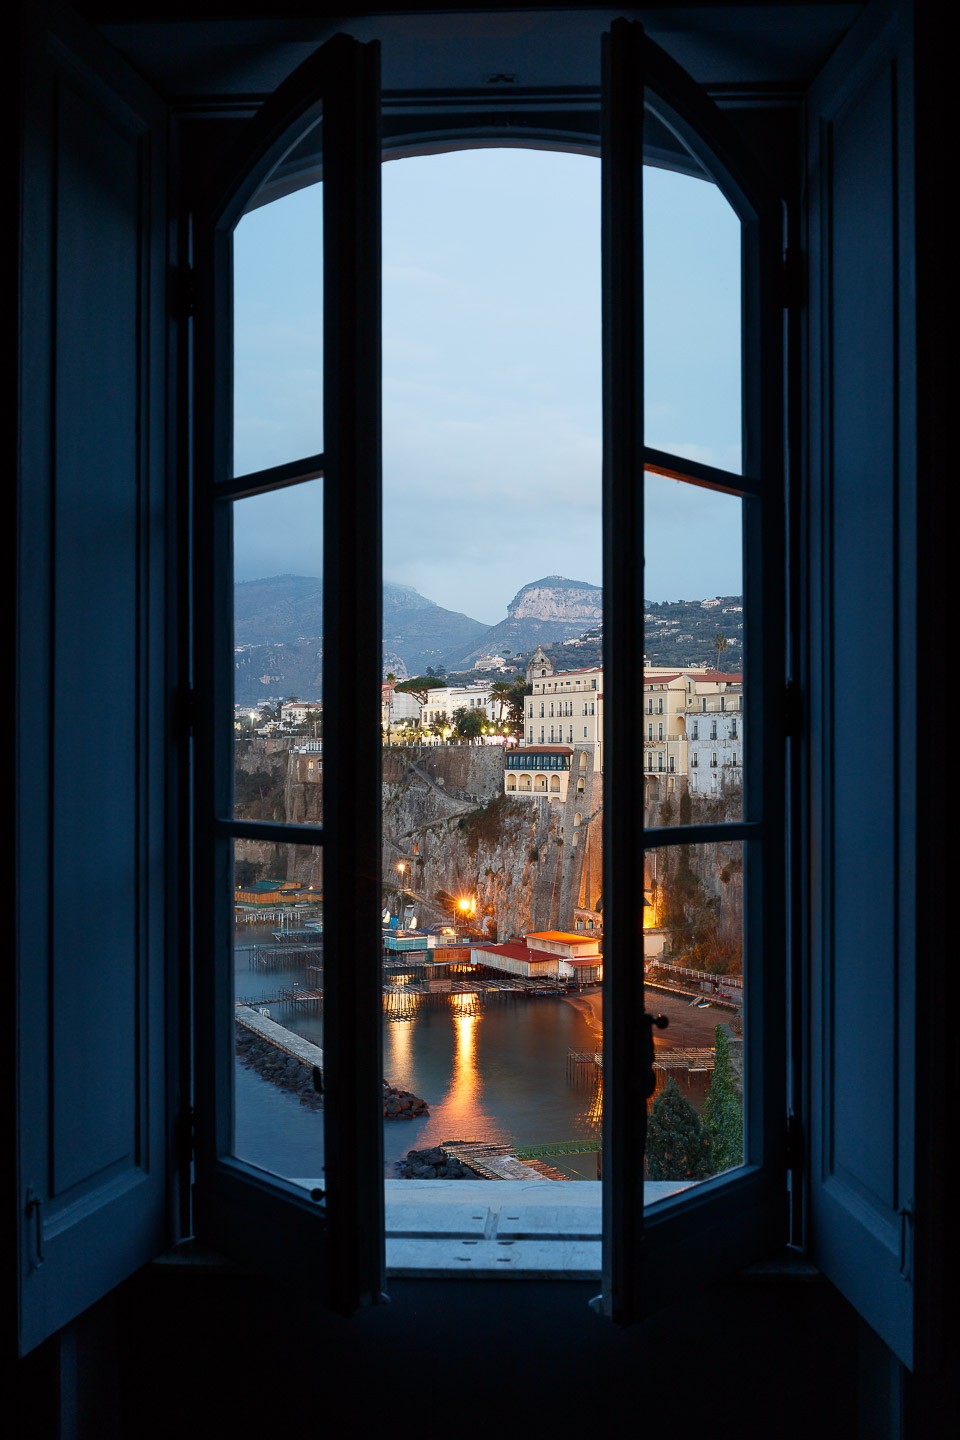 Villa Astor luxury property available for exclusive rent rental destination weddings event Italy Blue Suite best interiors services accommodationview Bay of Naples bathroom window